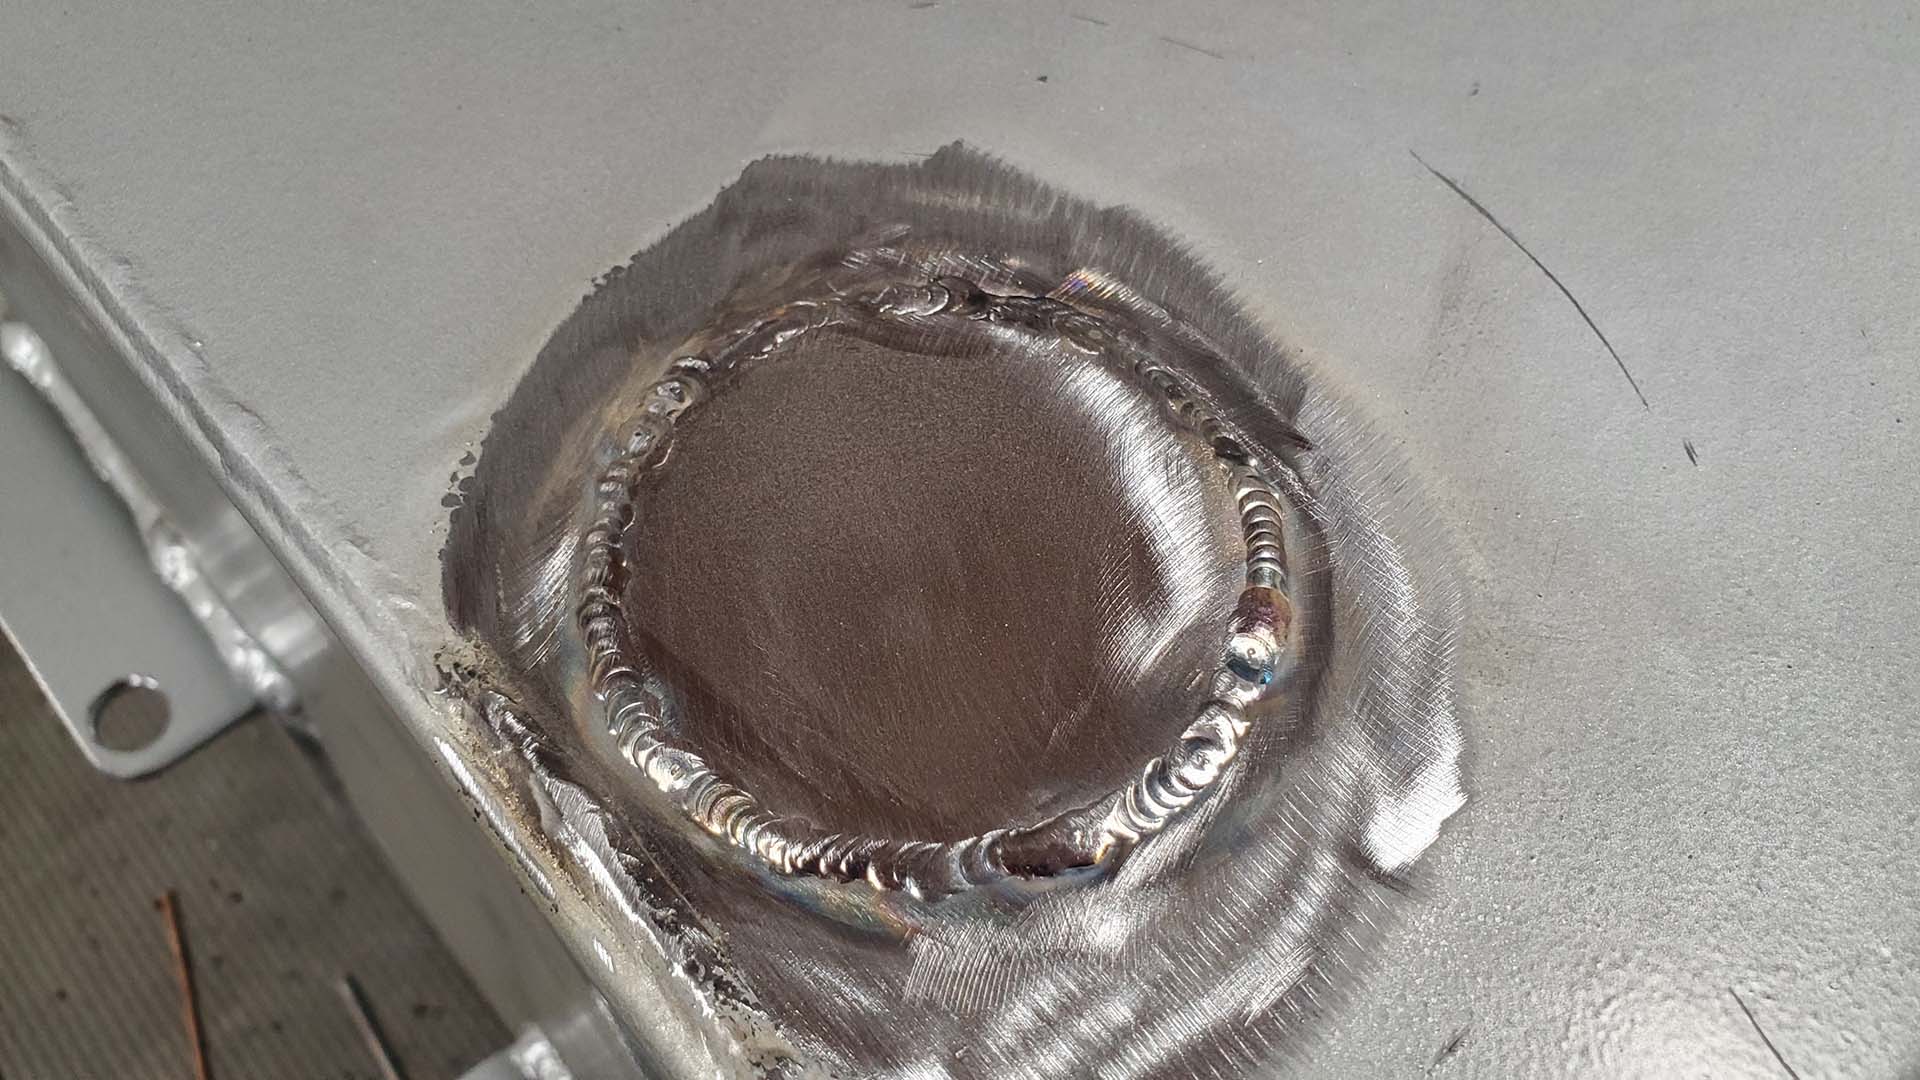 Some silver paint will touch up our welded patch and prevent rust.